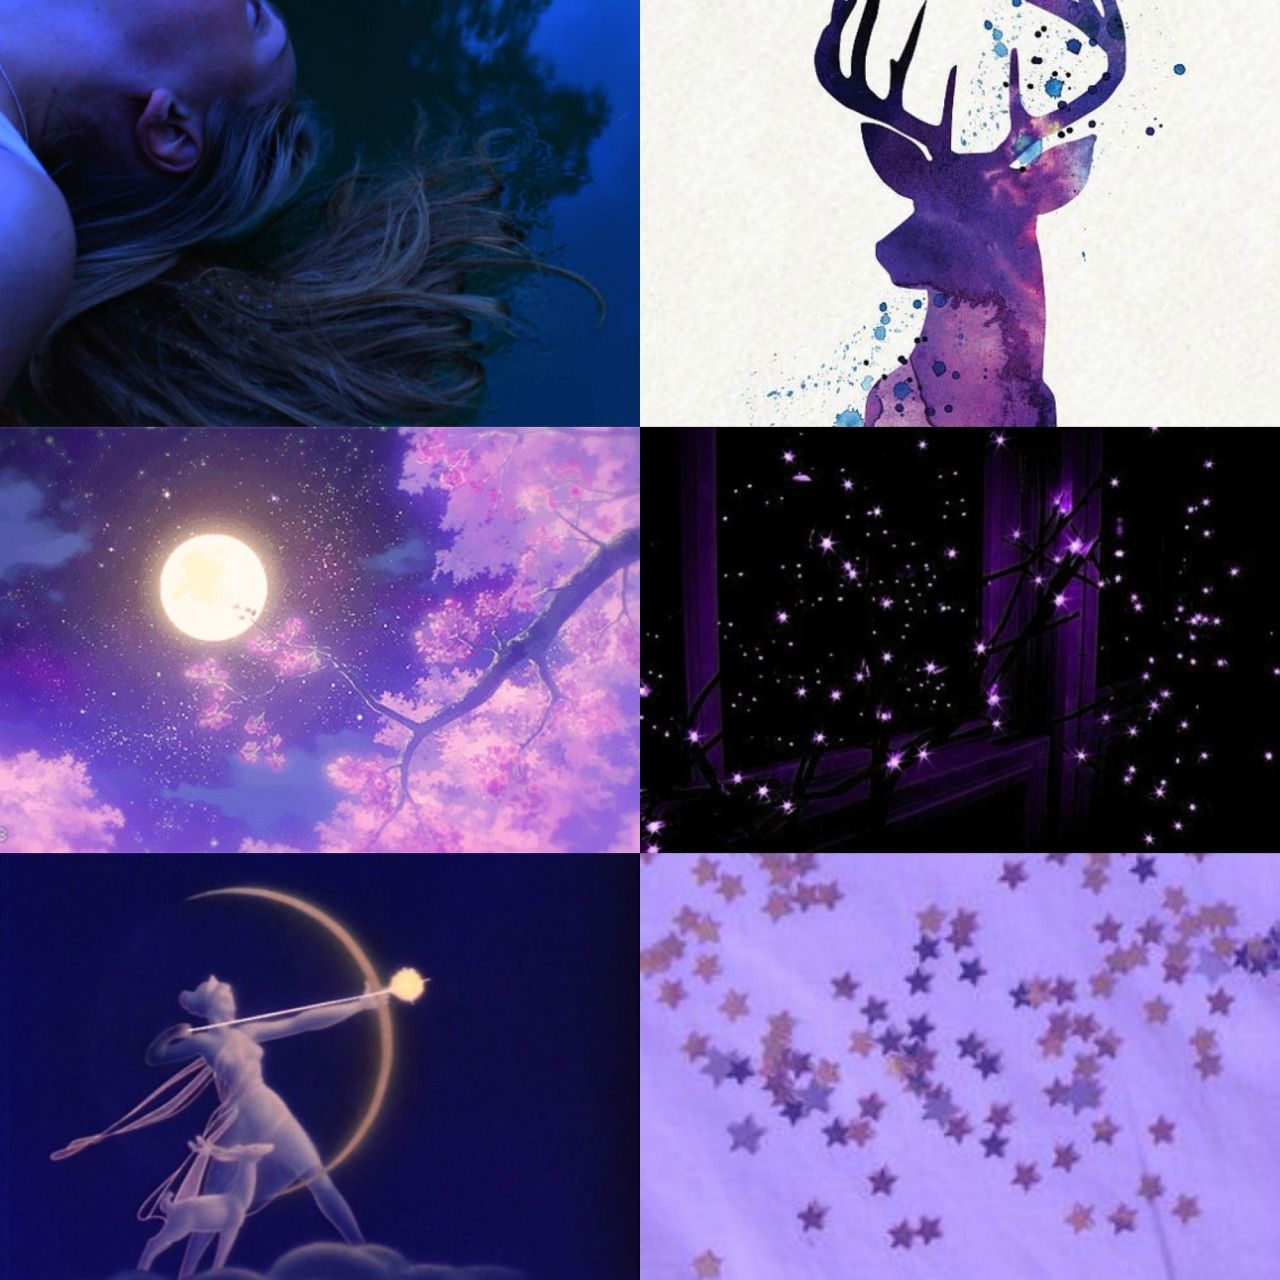 Aesthetic for Artemis, the Greek goddess of the hunt, wild animals, and the moon. - Artemis